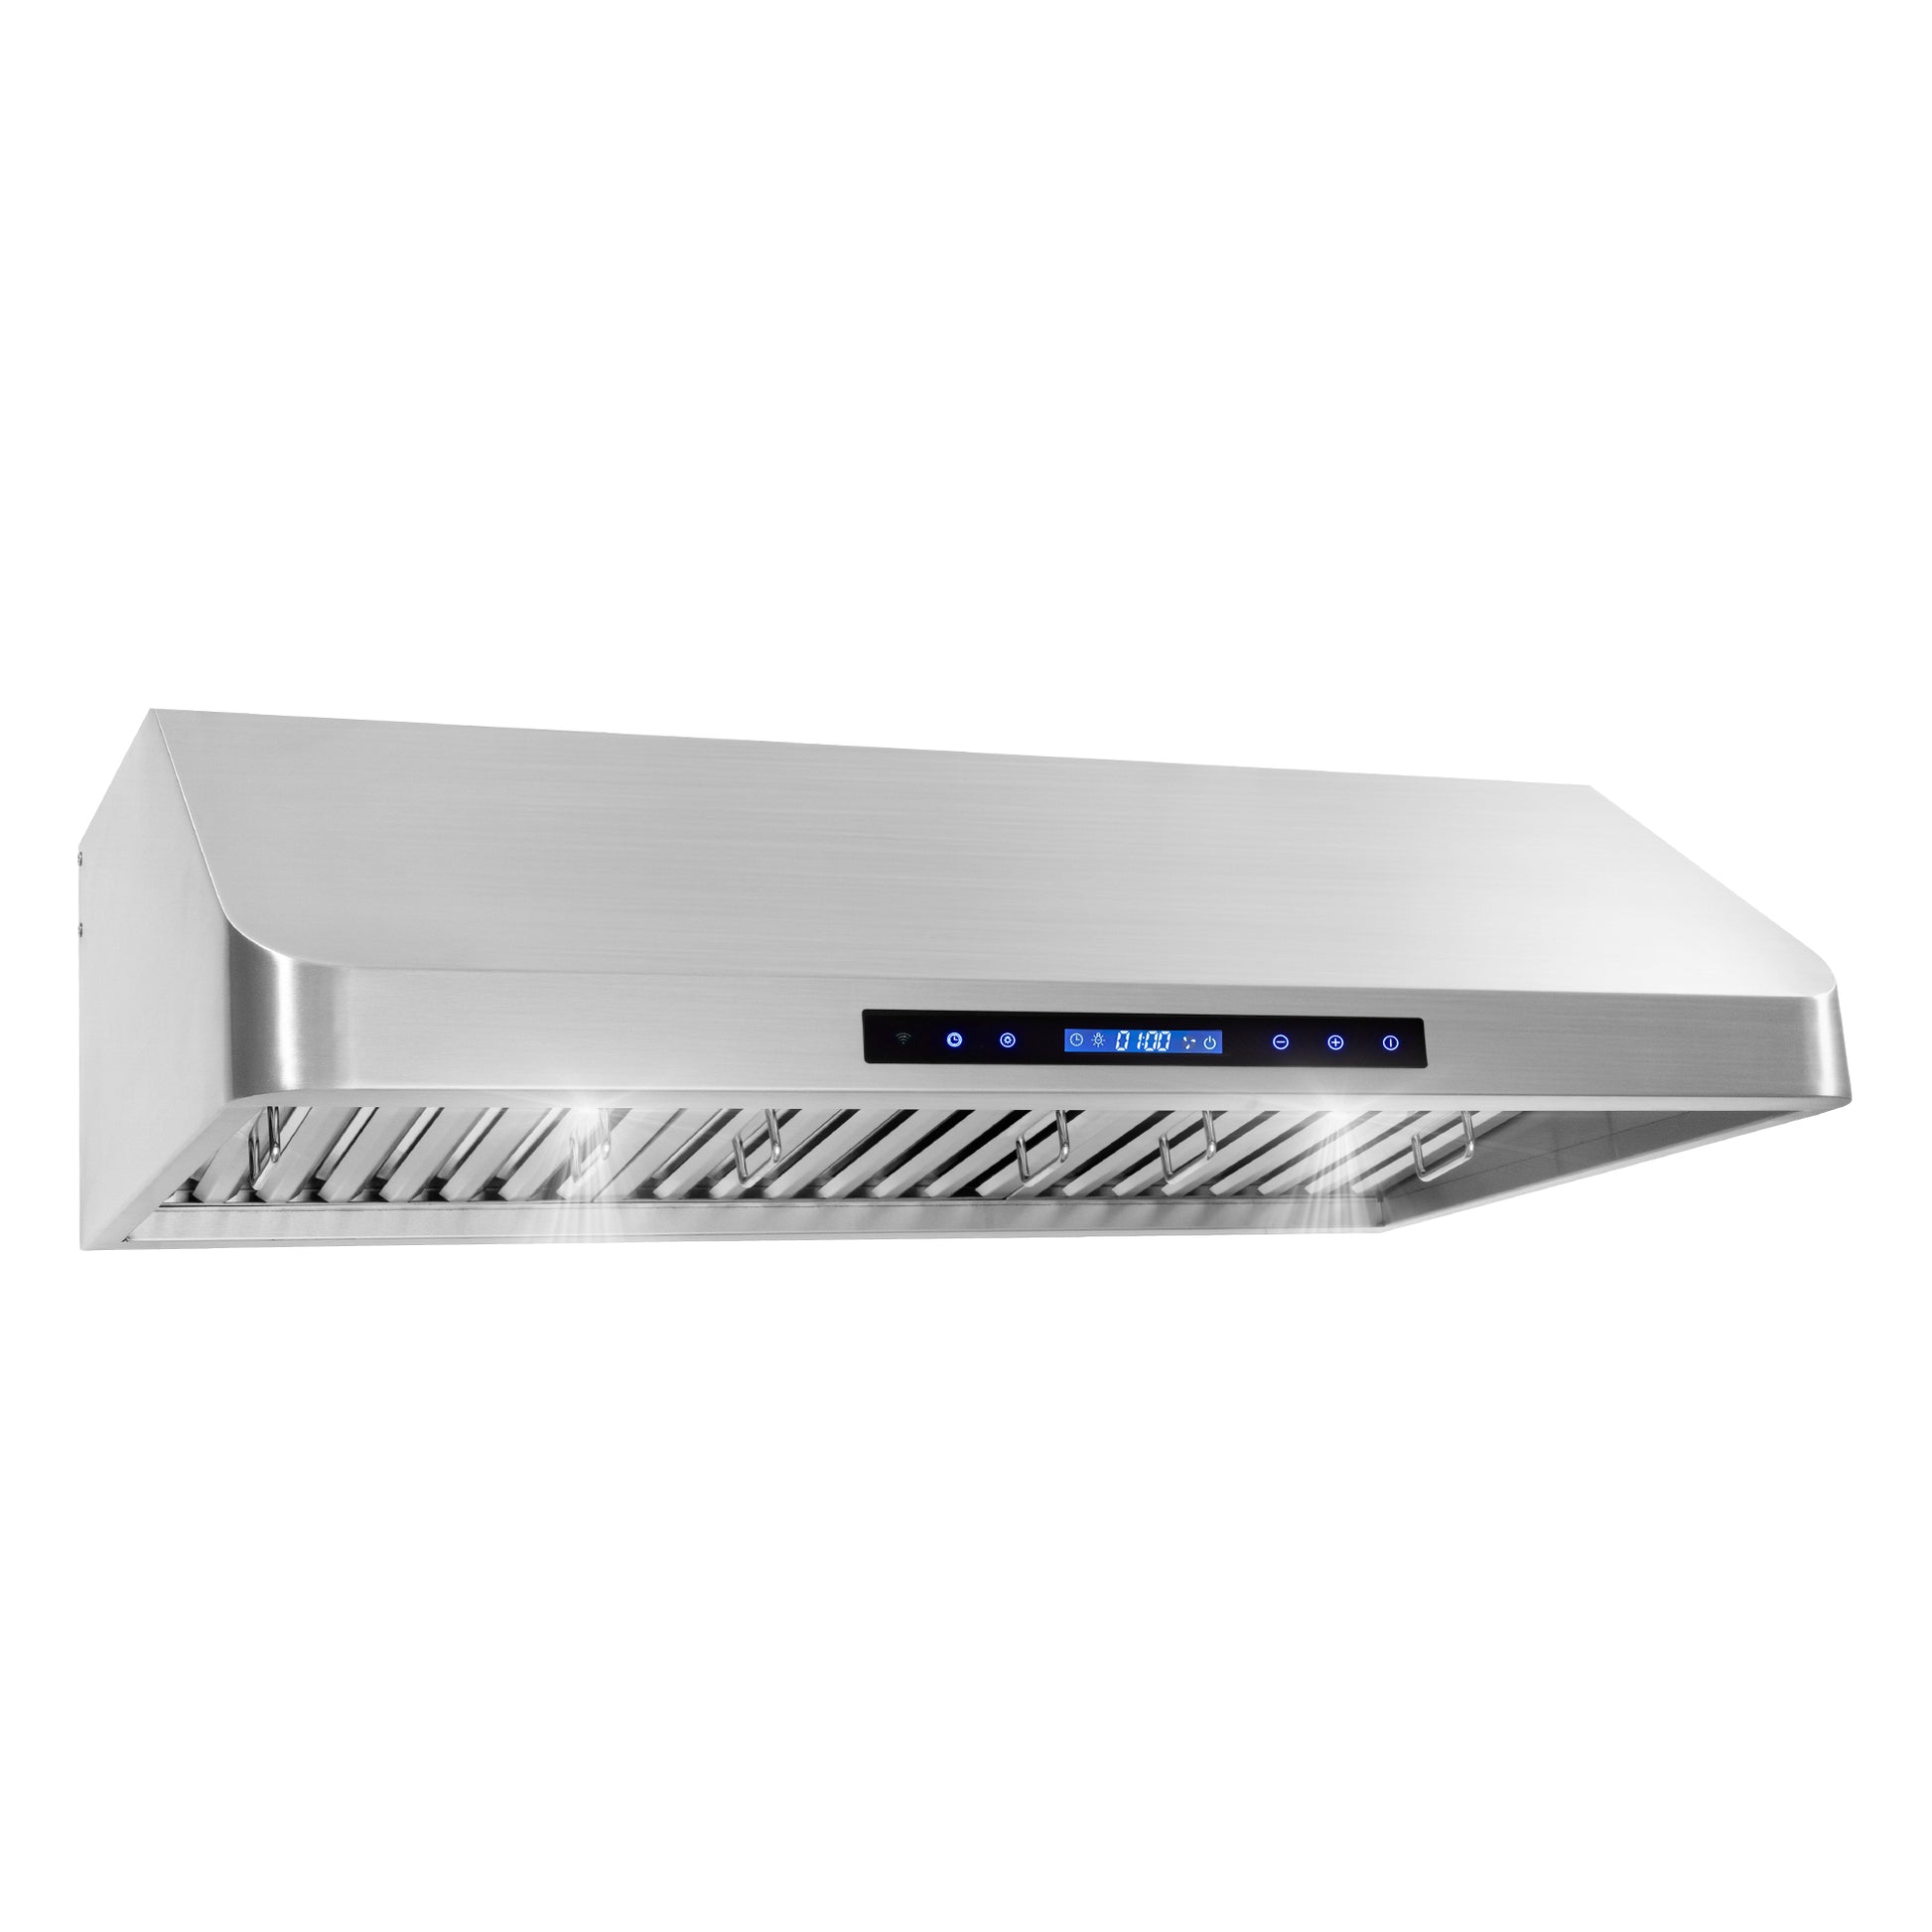 Cosmo 36 in. Stainless Steel Ducted Under Cabinet Range Hood with Touch Display, LED Lighting and Permanent Filters 500 CFM